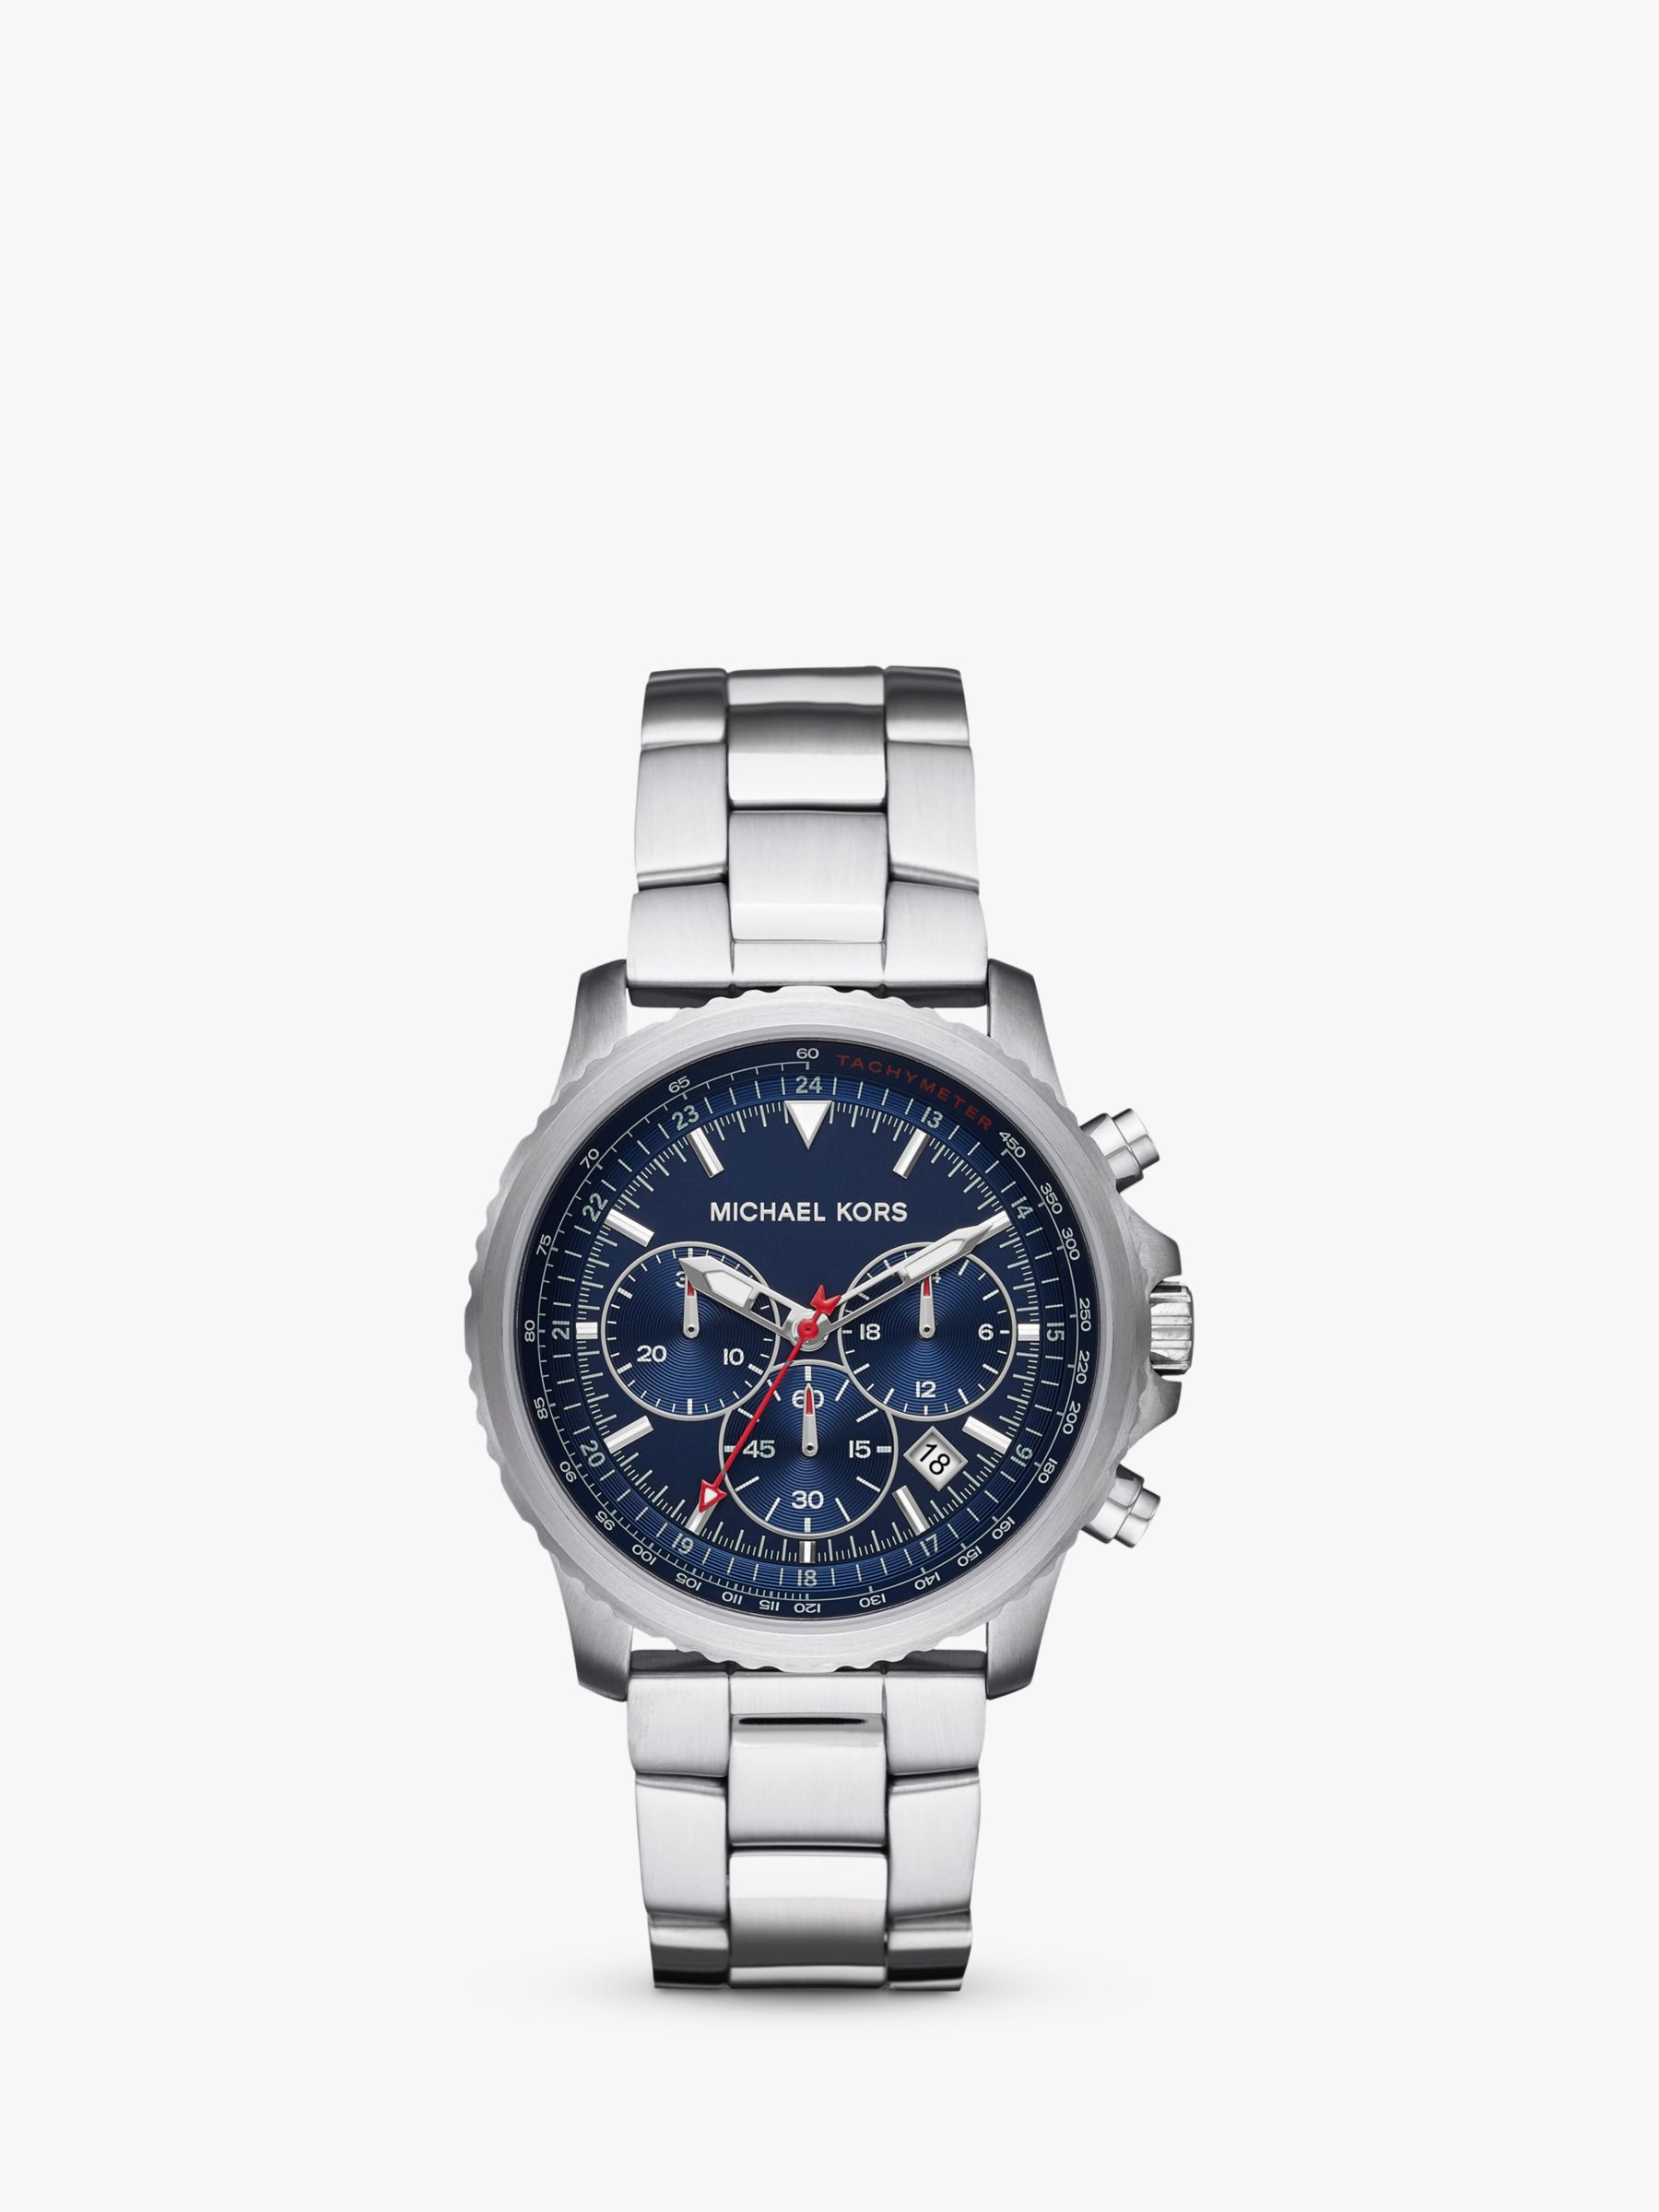 michael kors silver and blue watch